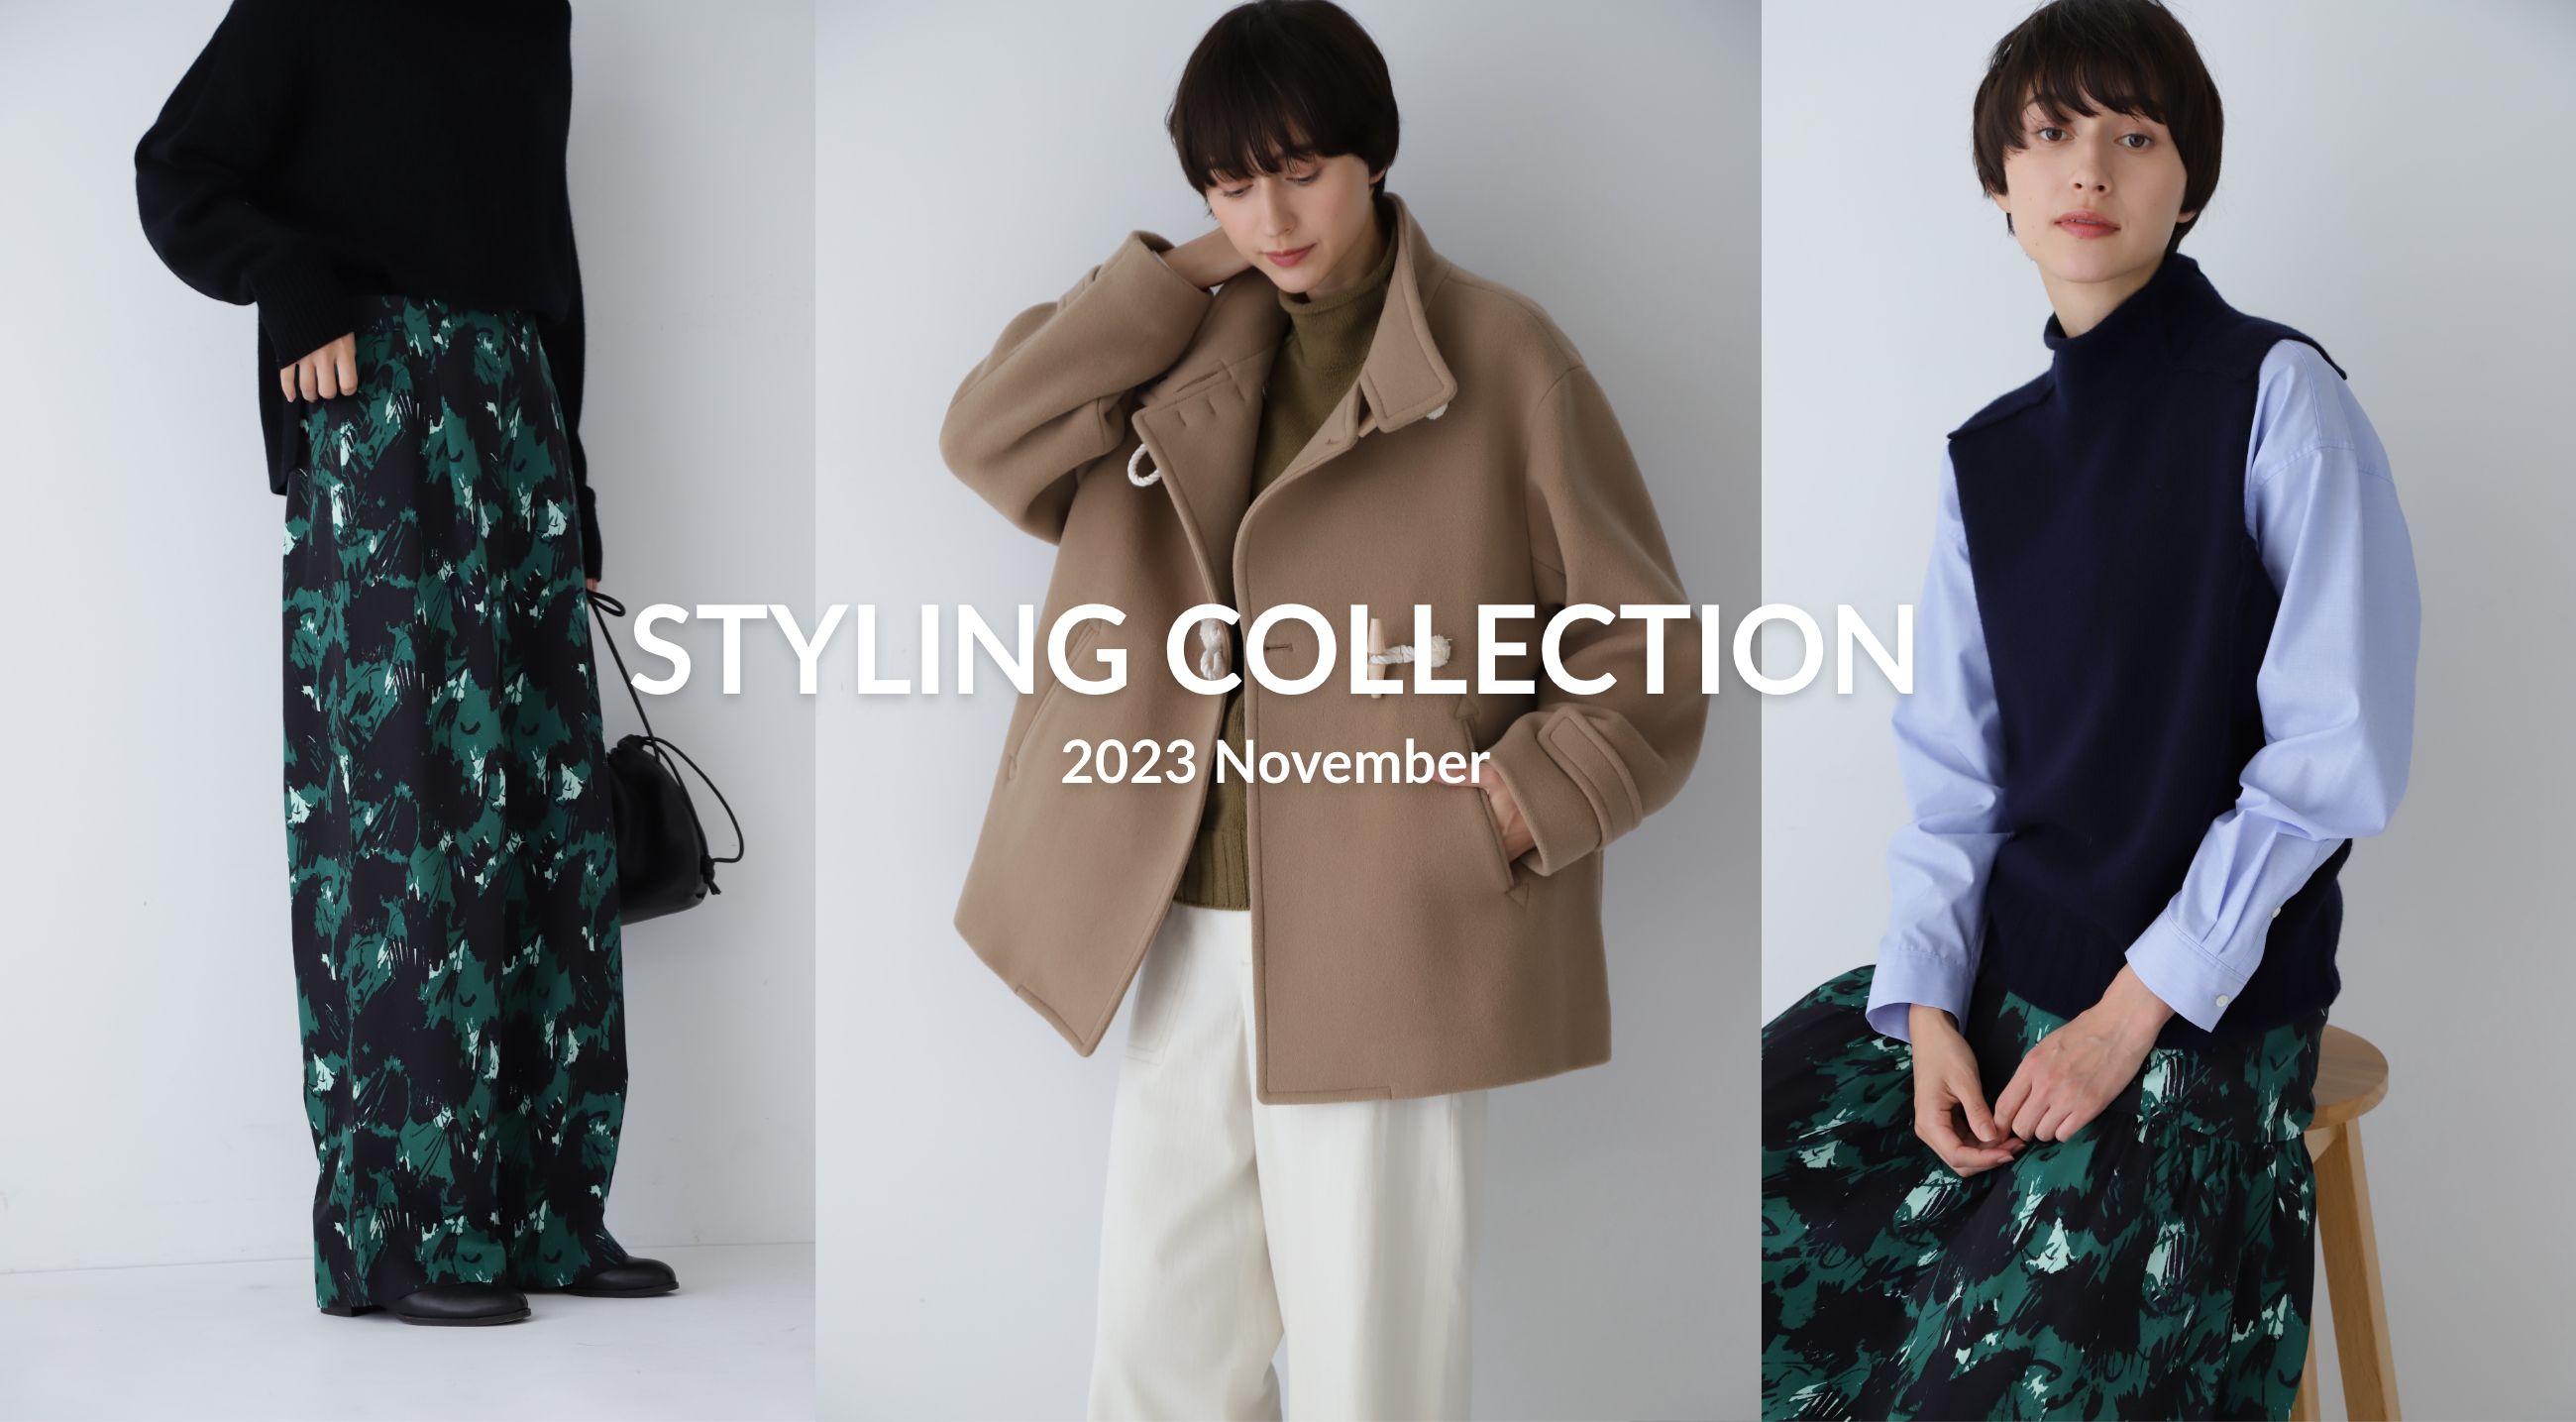 Styling Collection 2023 November